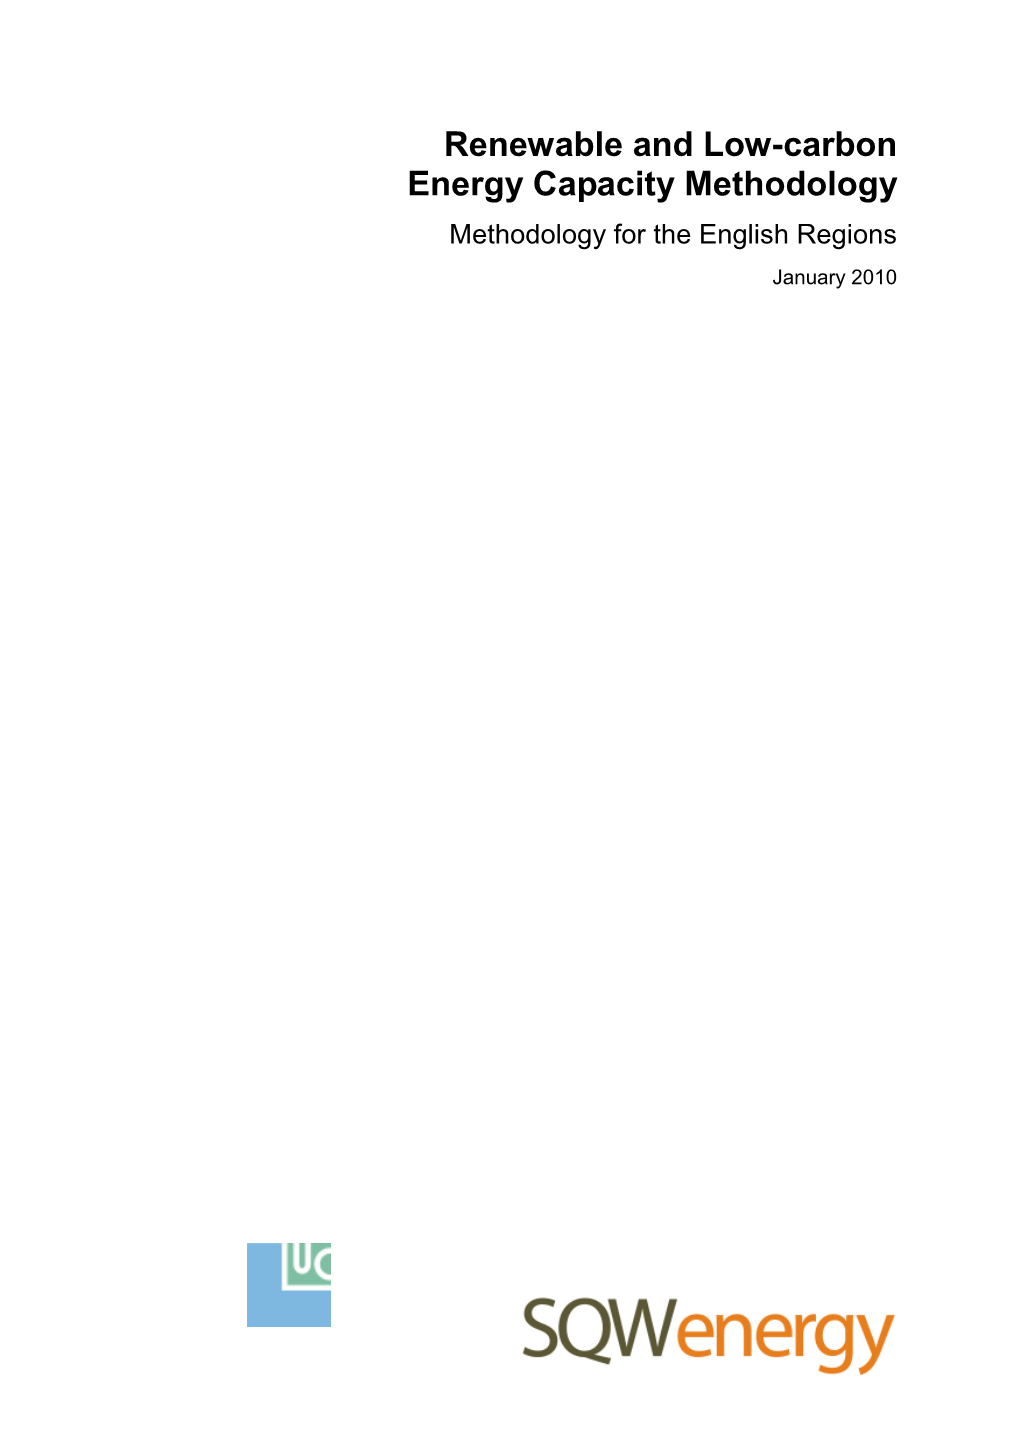 Renewable and Low-Carbon Energy Capacity Methodology Methodology for the English Regions January 2010